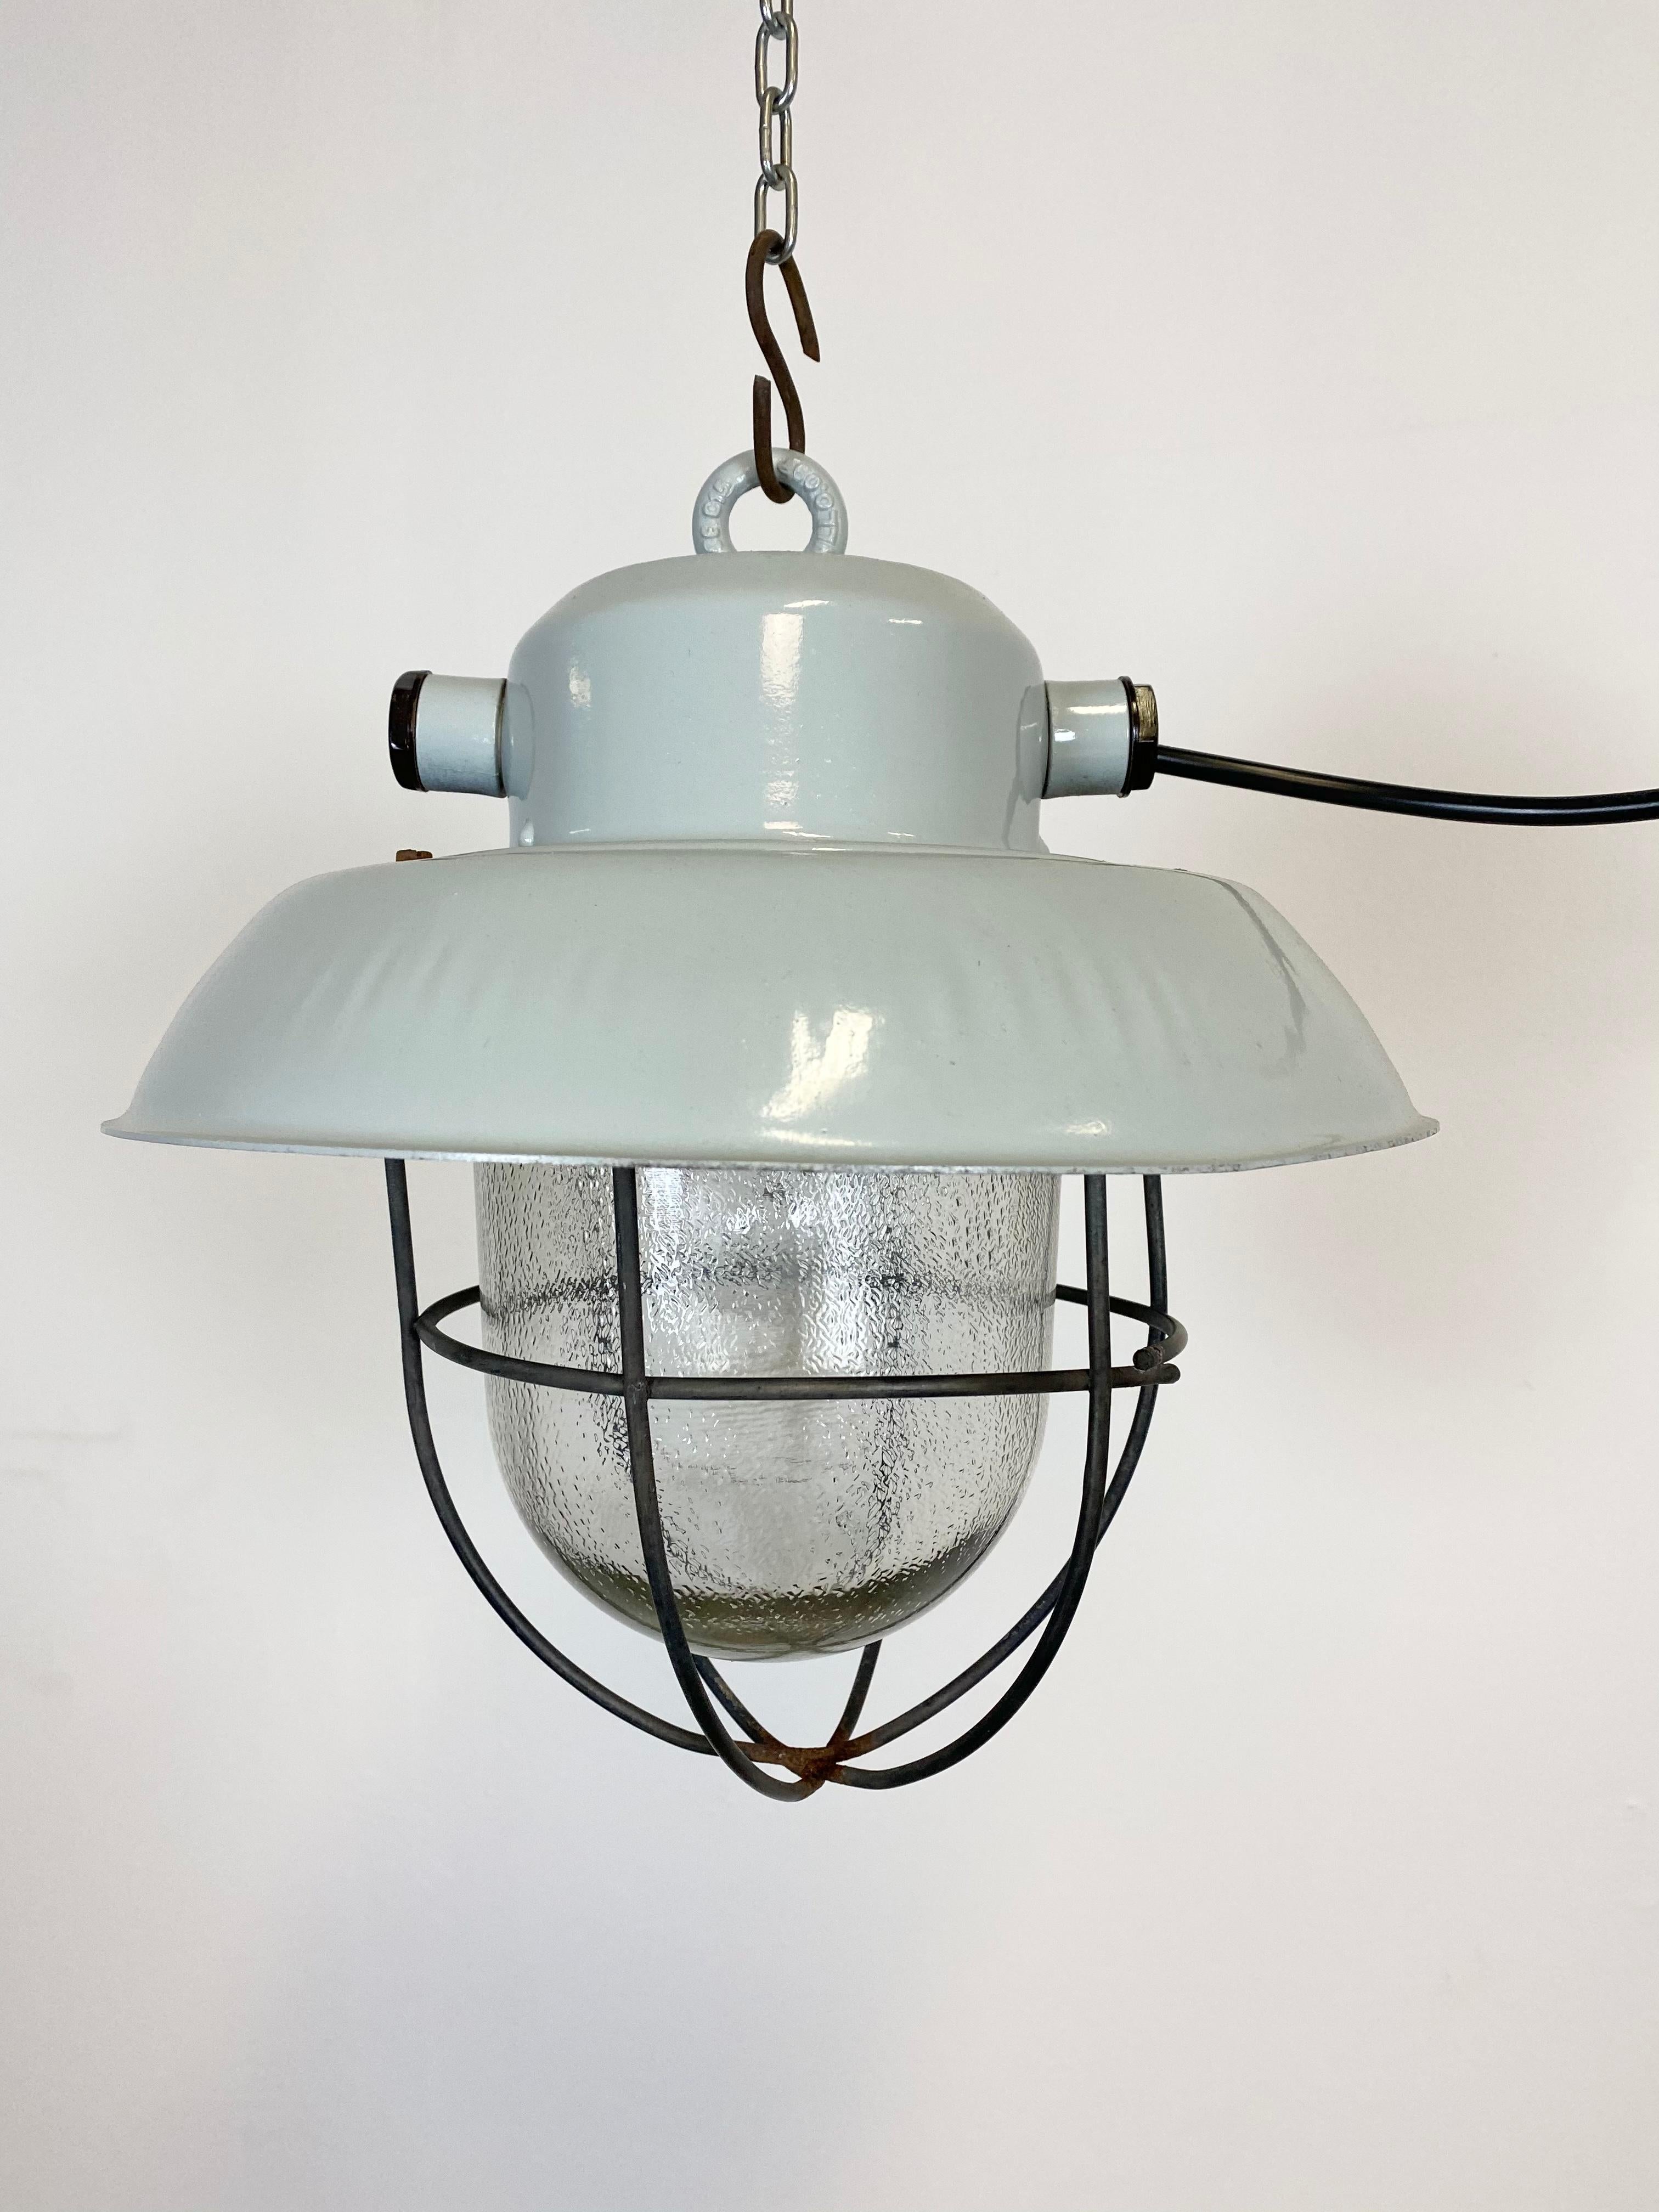 Industrial pendant lamp made in former Czechoslovakia during the 1960s.It features an aluminium shade, a frosted glass and a iron grid. New porcelain socket requires E 27 lightbulbs. New wire. The weight of the lamp is 2 kg.